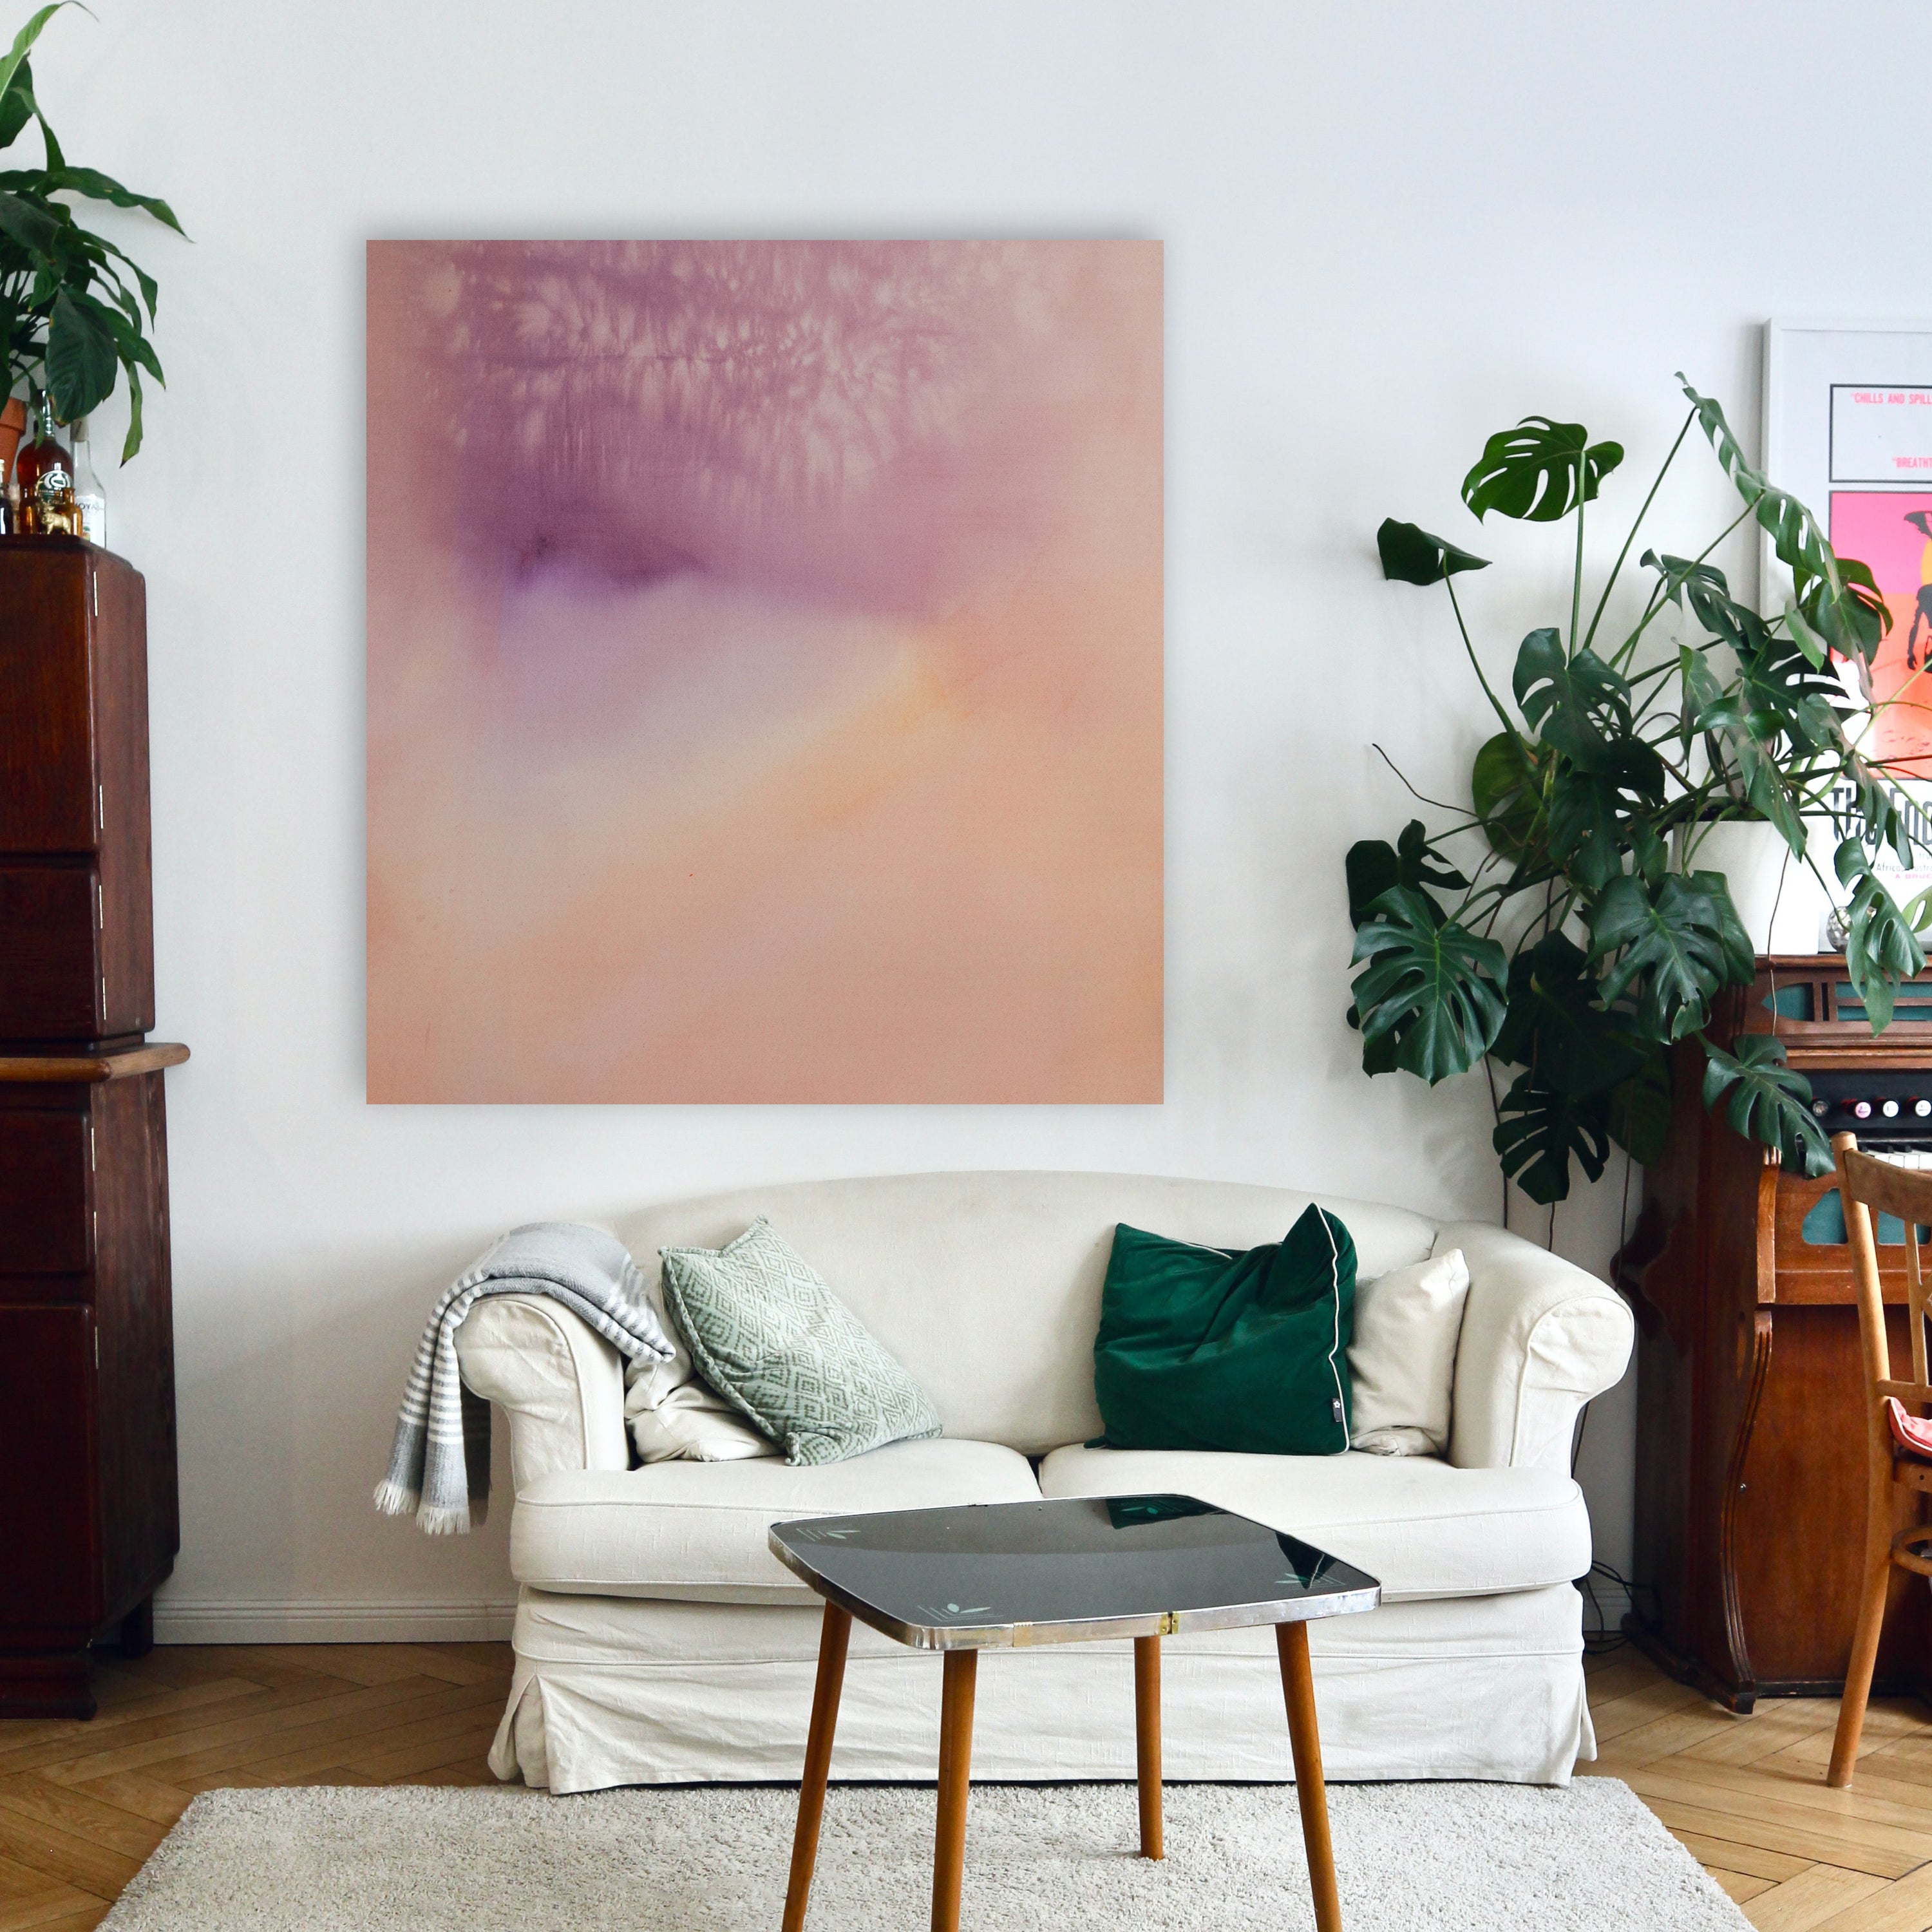 Large purple and pale orange abstract painting hangs about a white loveseat in a living room.